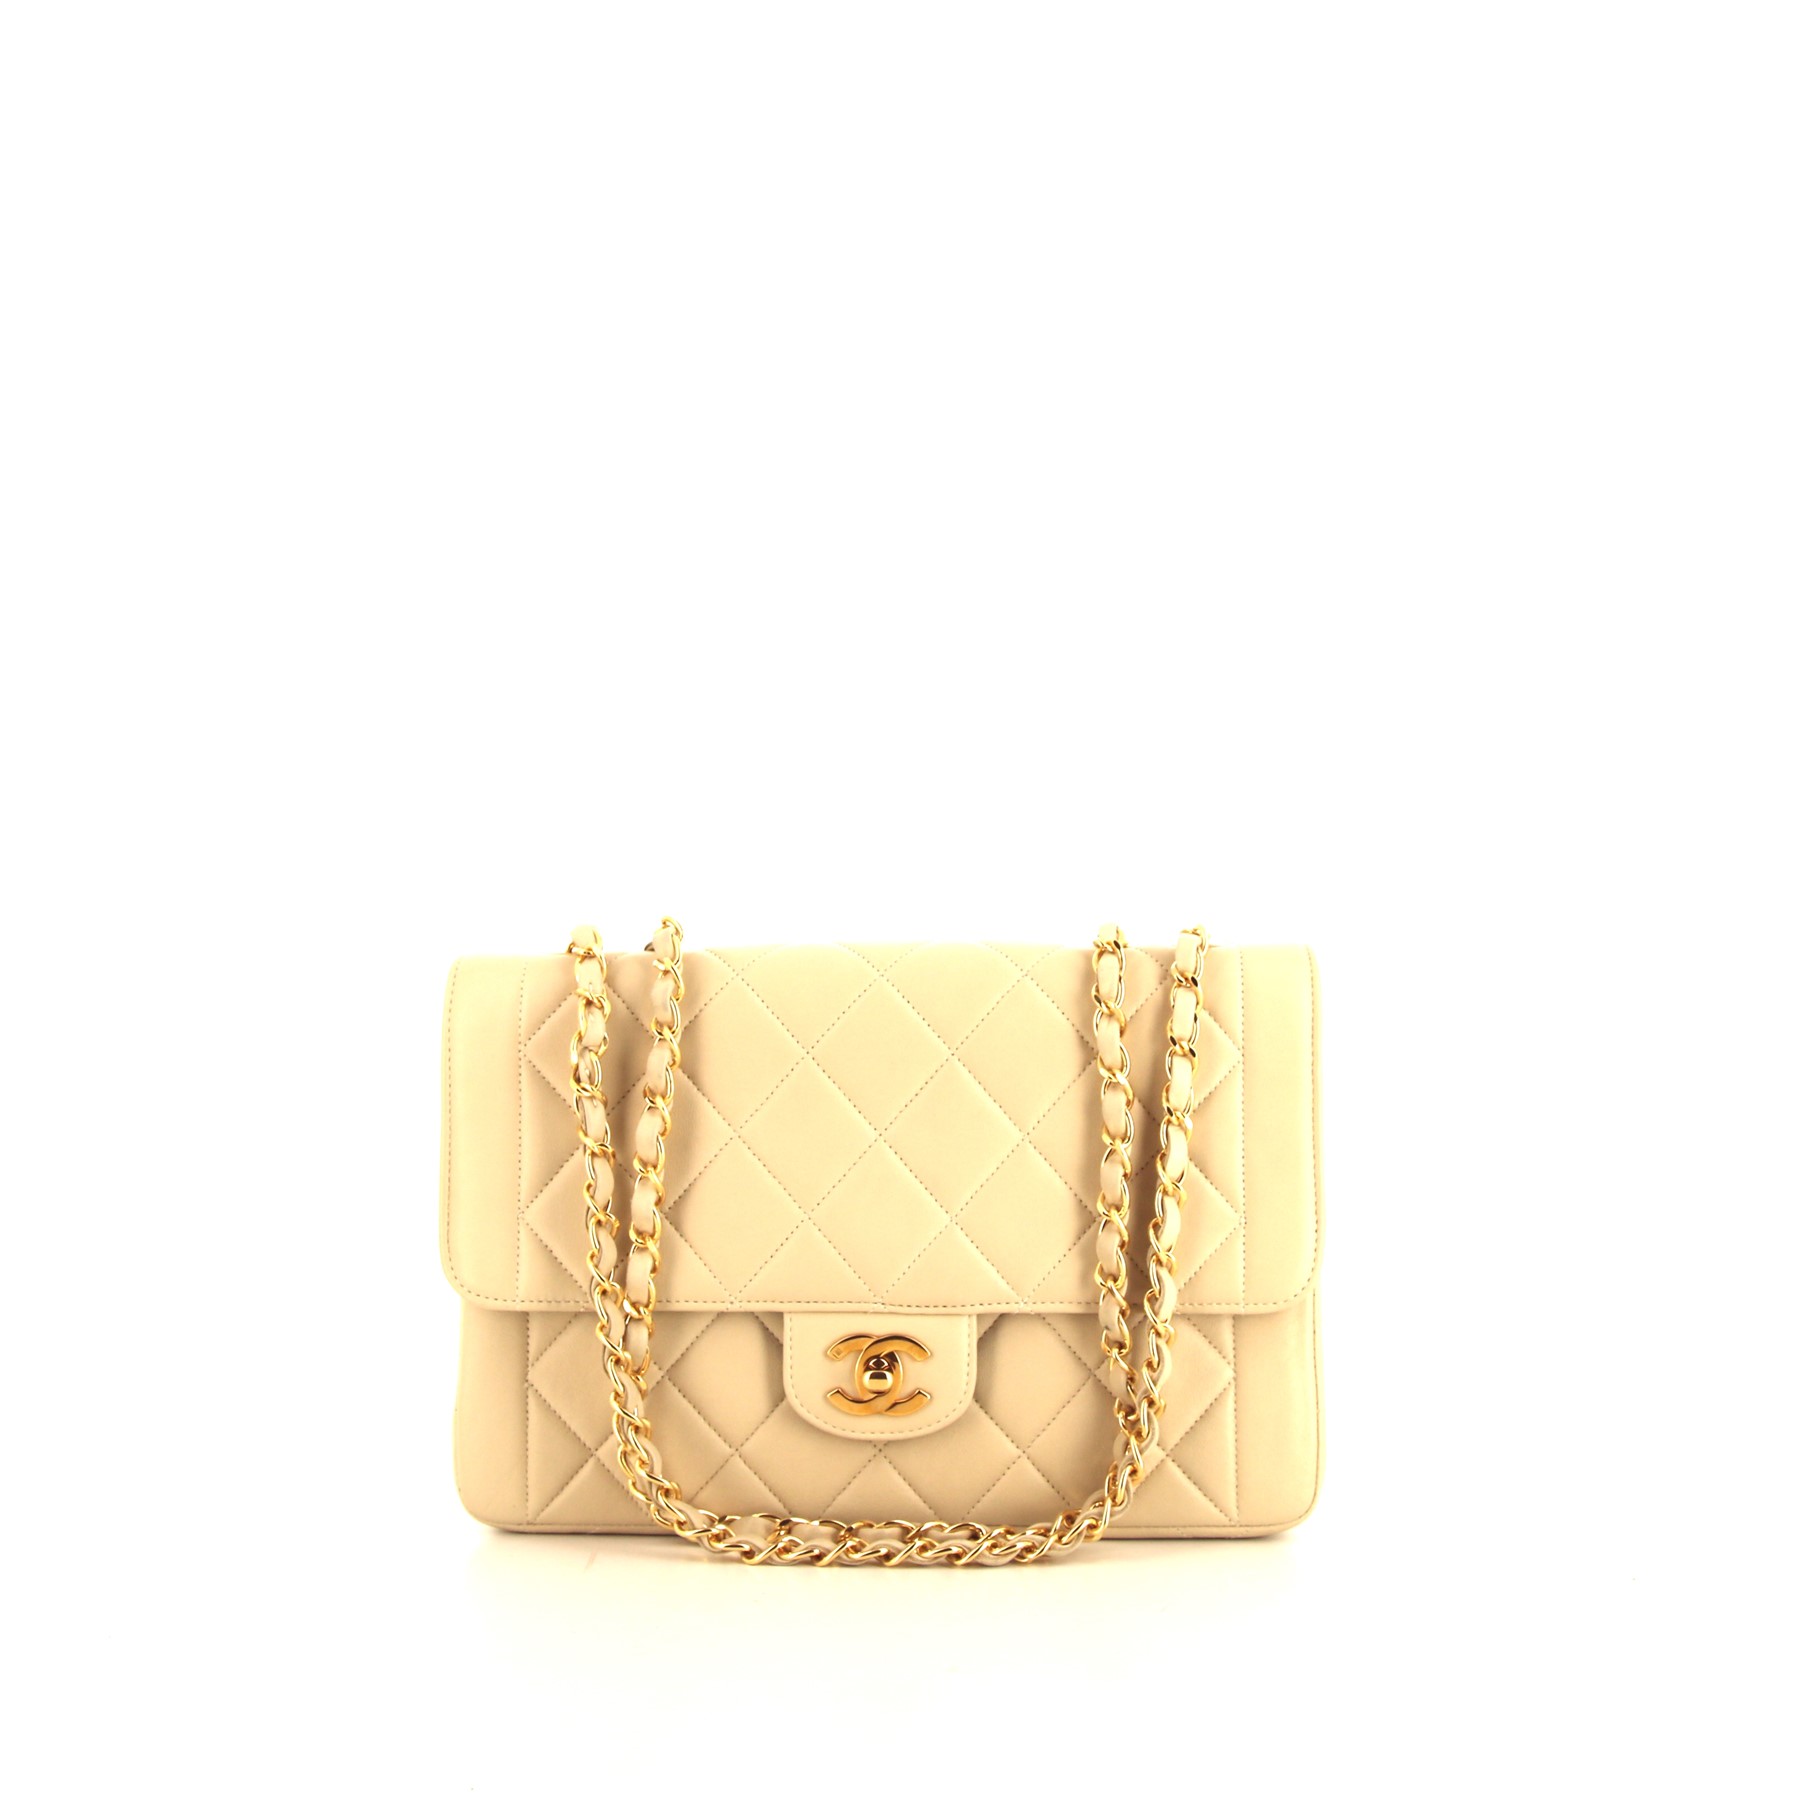 Handbag In Cream Color Quilted Leather